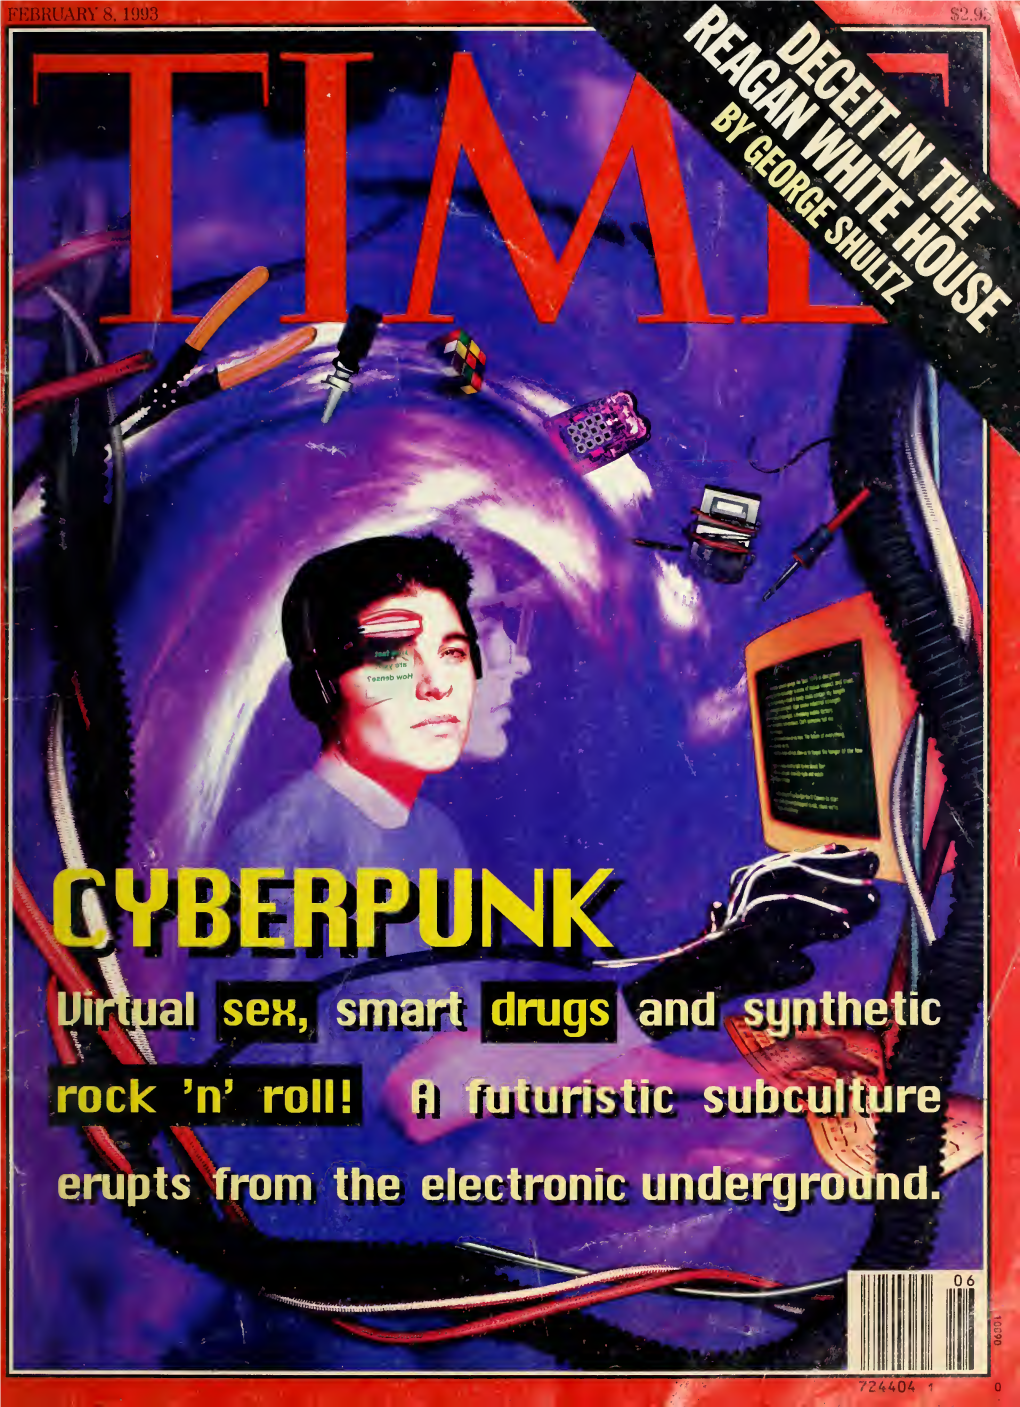 CYBERPUNK Virtual Sex, Smart Drugs and Synthetic Rock 'N' Roll